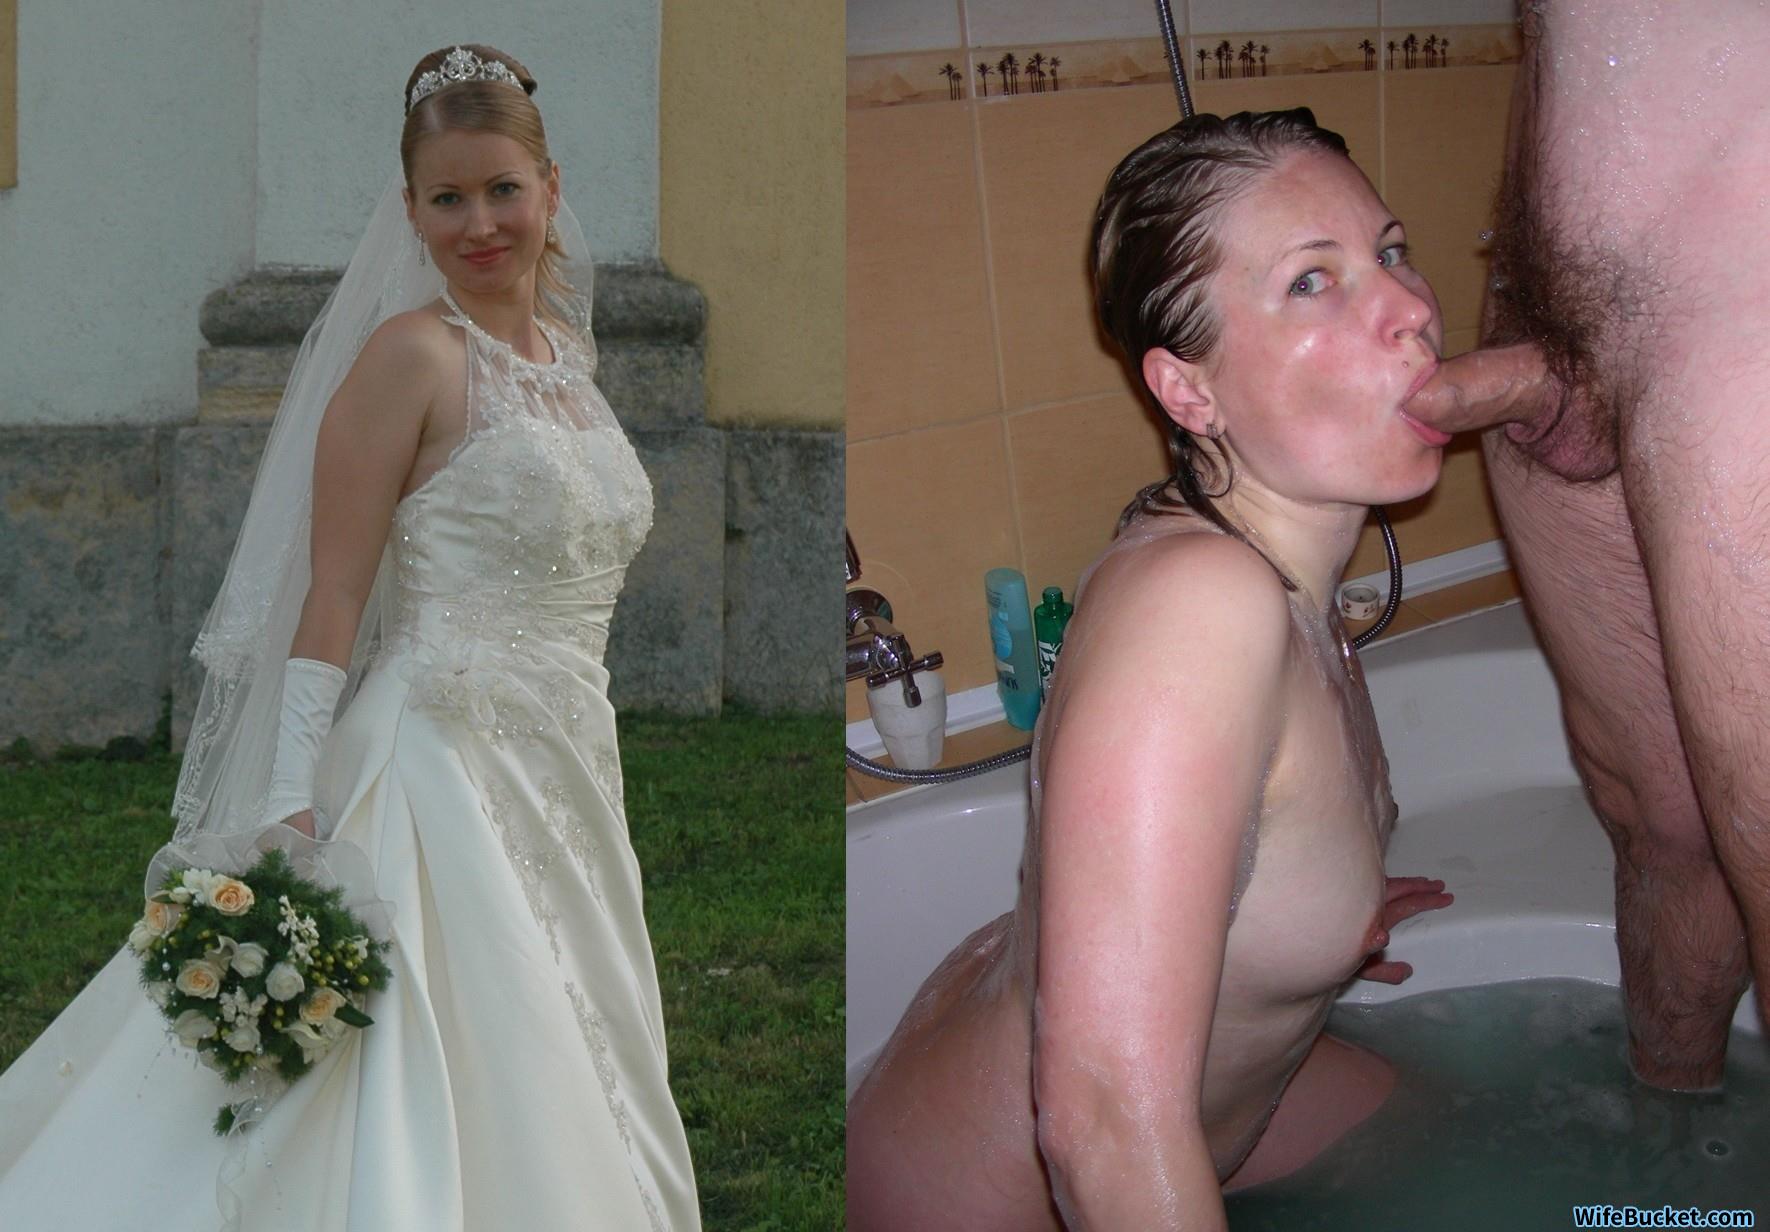 Before-after nudes of sexy amateur brides! Some home porn, too -) image